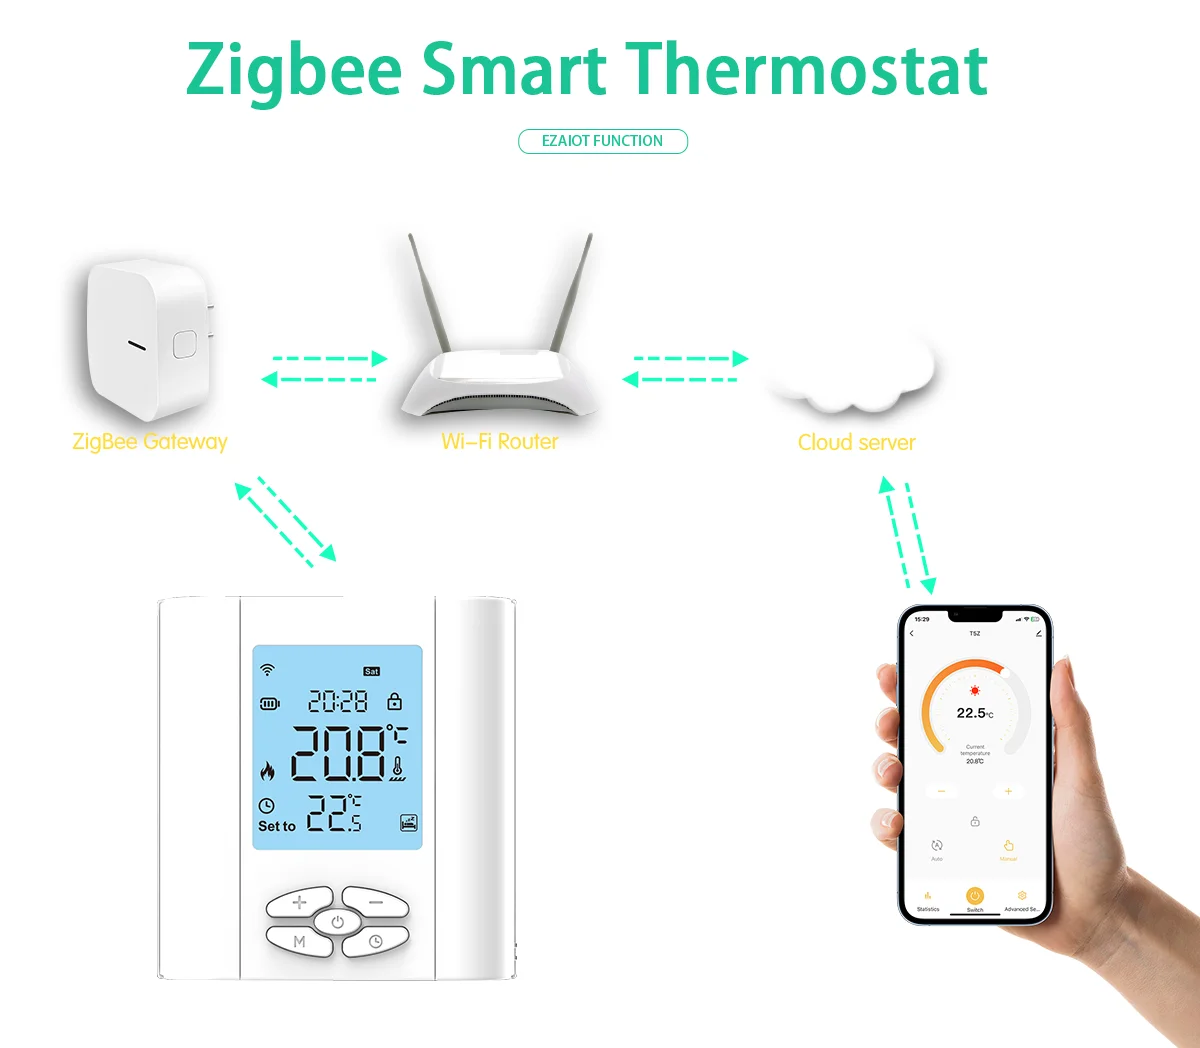 https://ae01.alicdn.com/kf/S28dd8a659d8e43ad8af3b761232b0479K/Tuya-ZigBee-Smart-Thermostat-5A-Water-Gas-Boiler-Battery-Powered-Temperature-Controller-Voice-Control-Google-Home.png